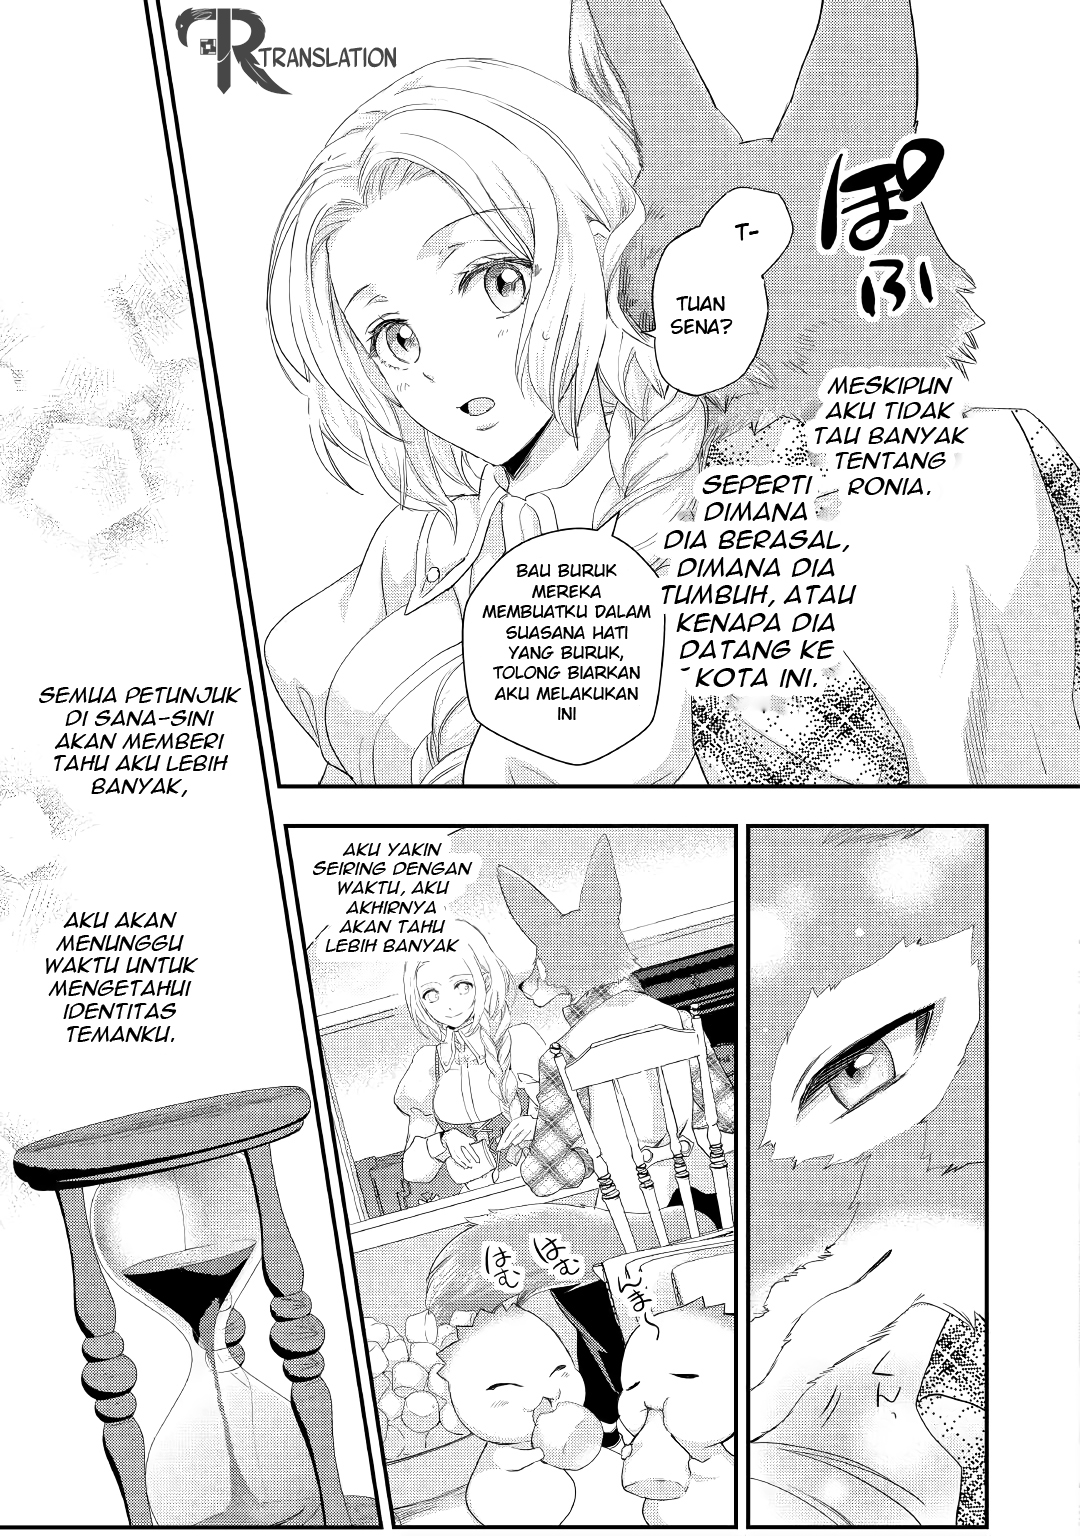 Milady Just Wants to Relax Chapter 12